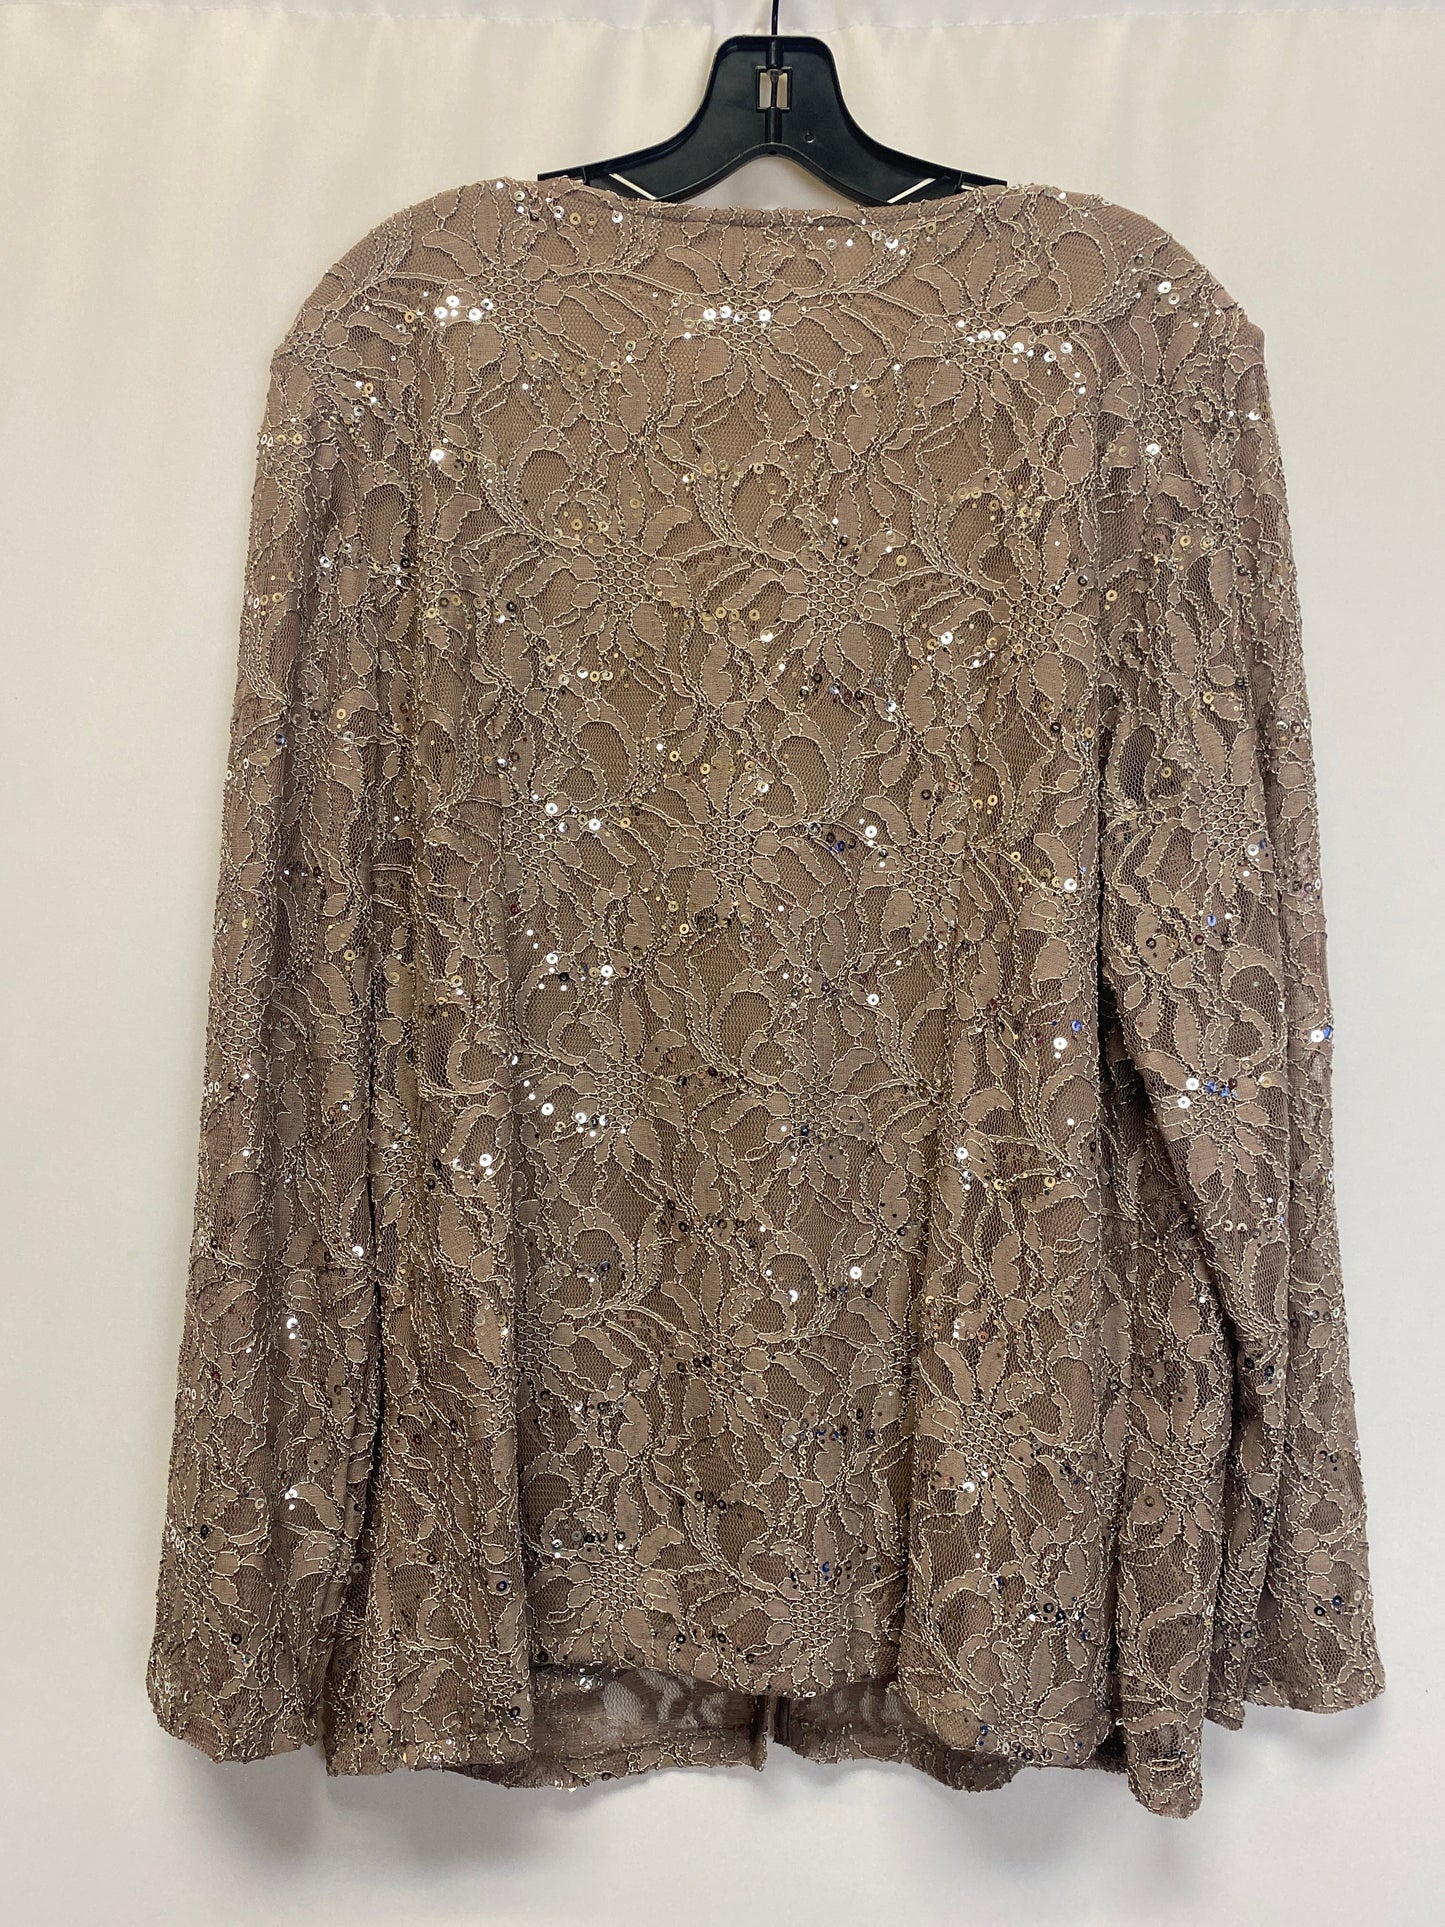 Top Long Sleeve By Jessica Howard  Size: Xxl